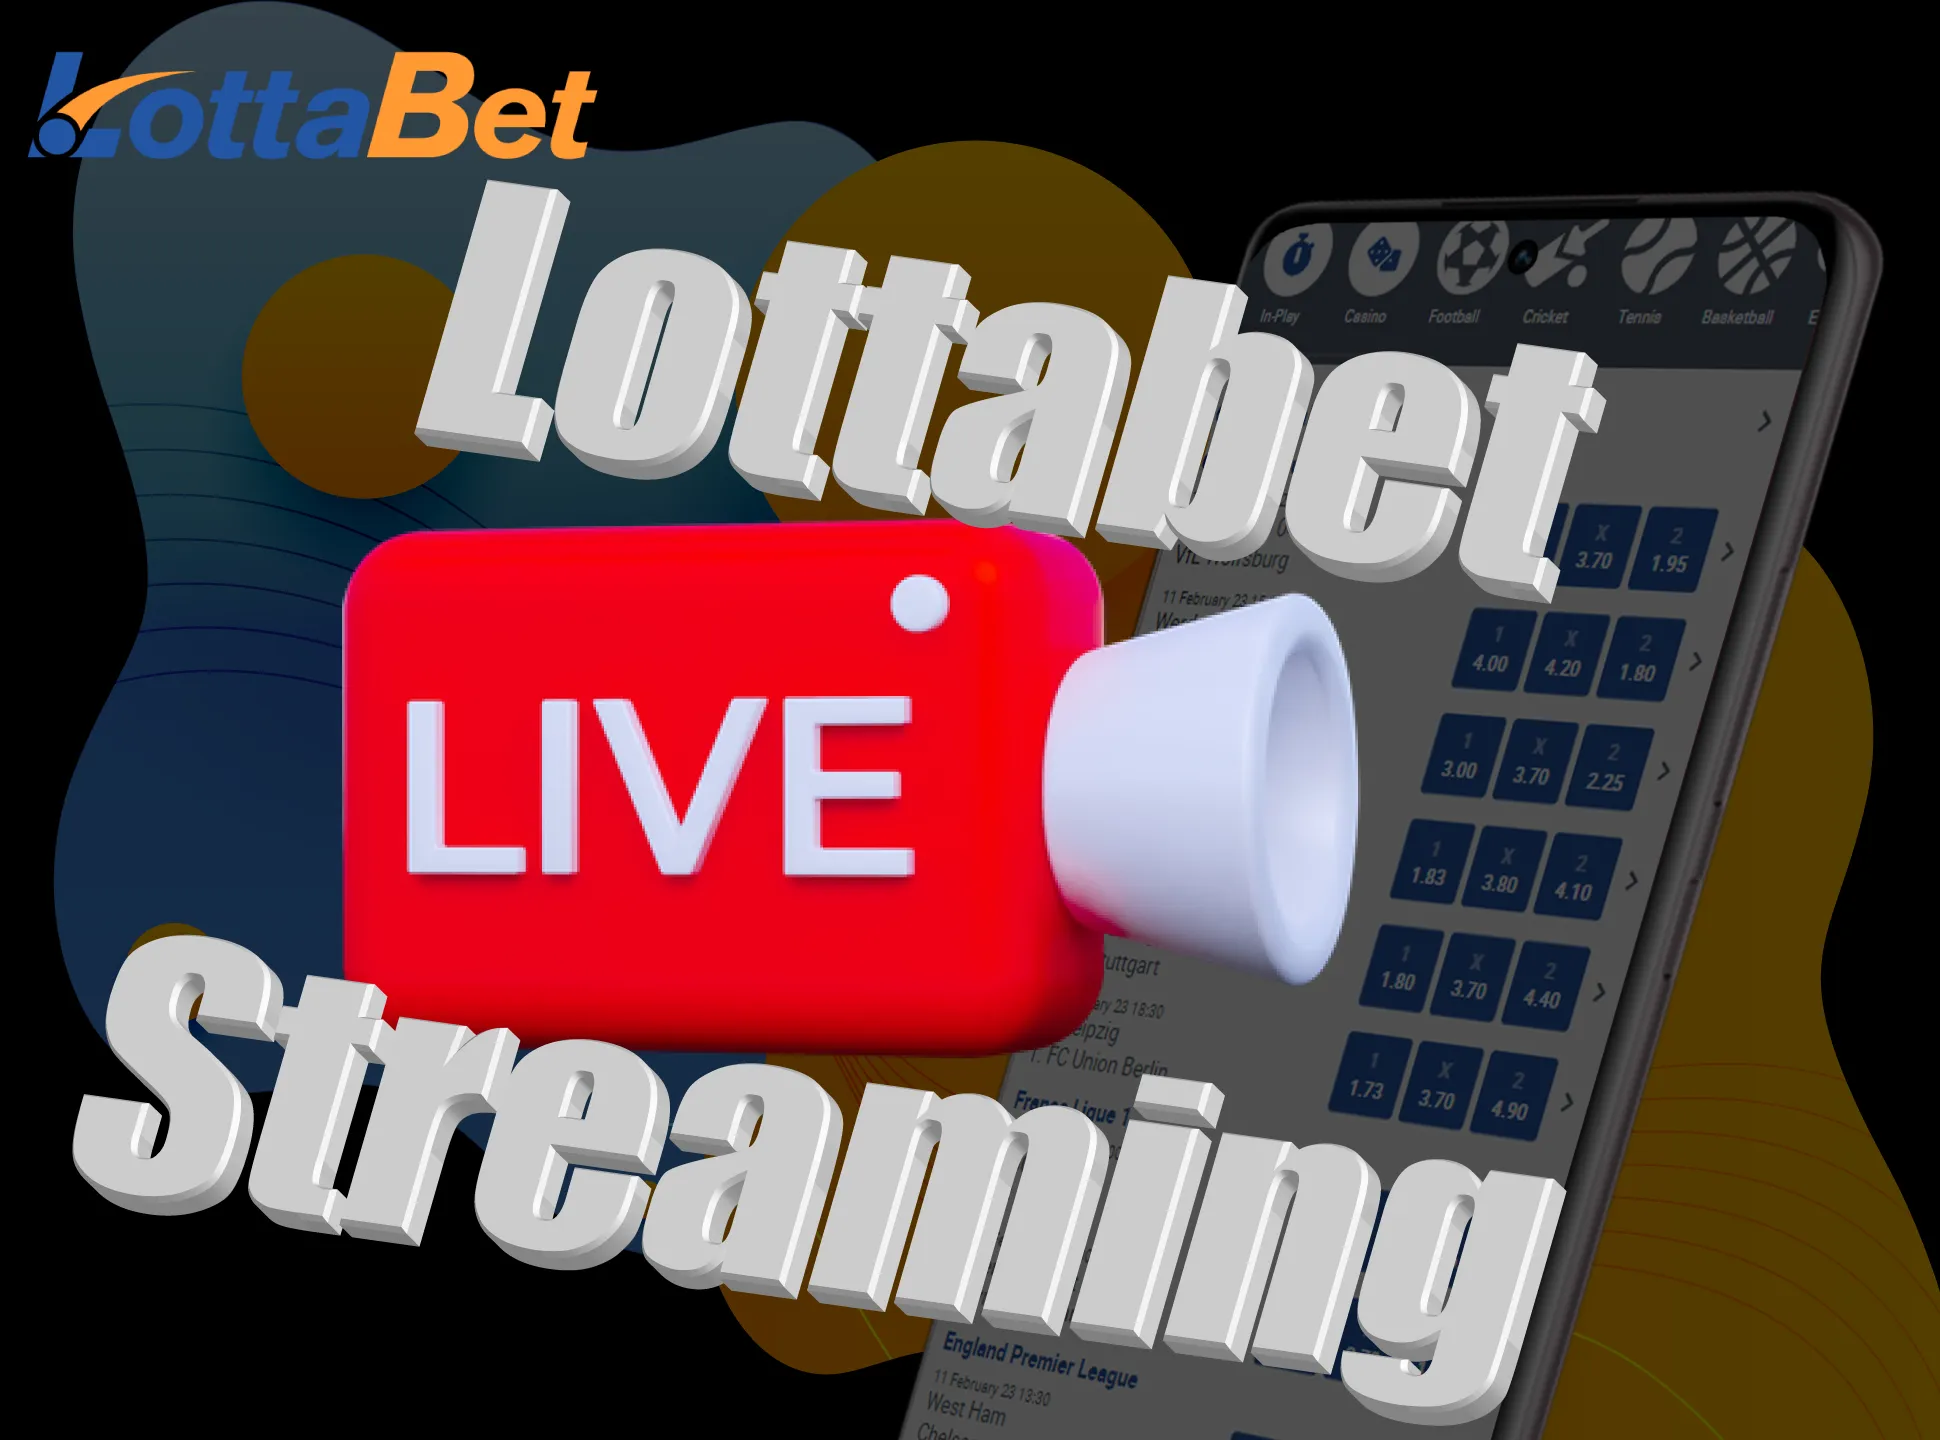 Lottabet provides its bettors with live streamings of the match right on its site.